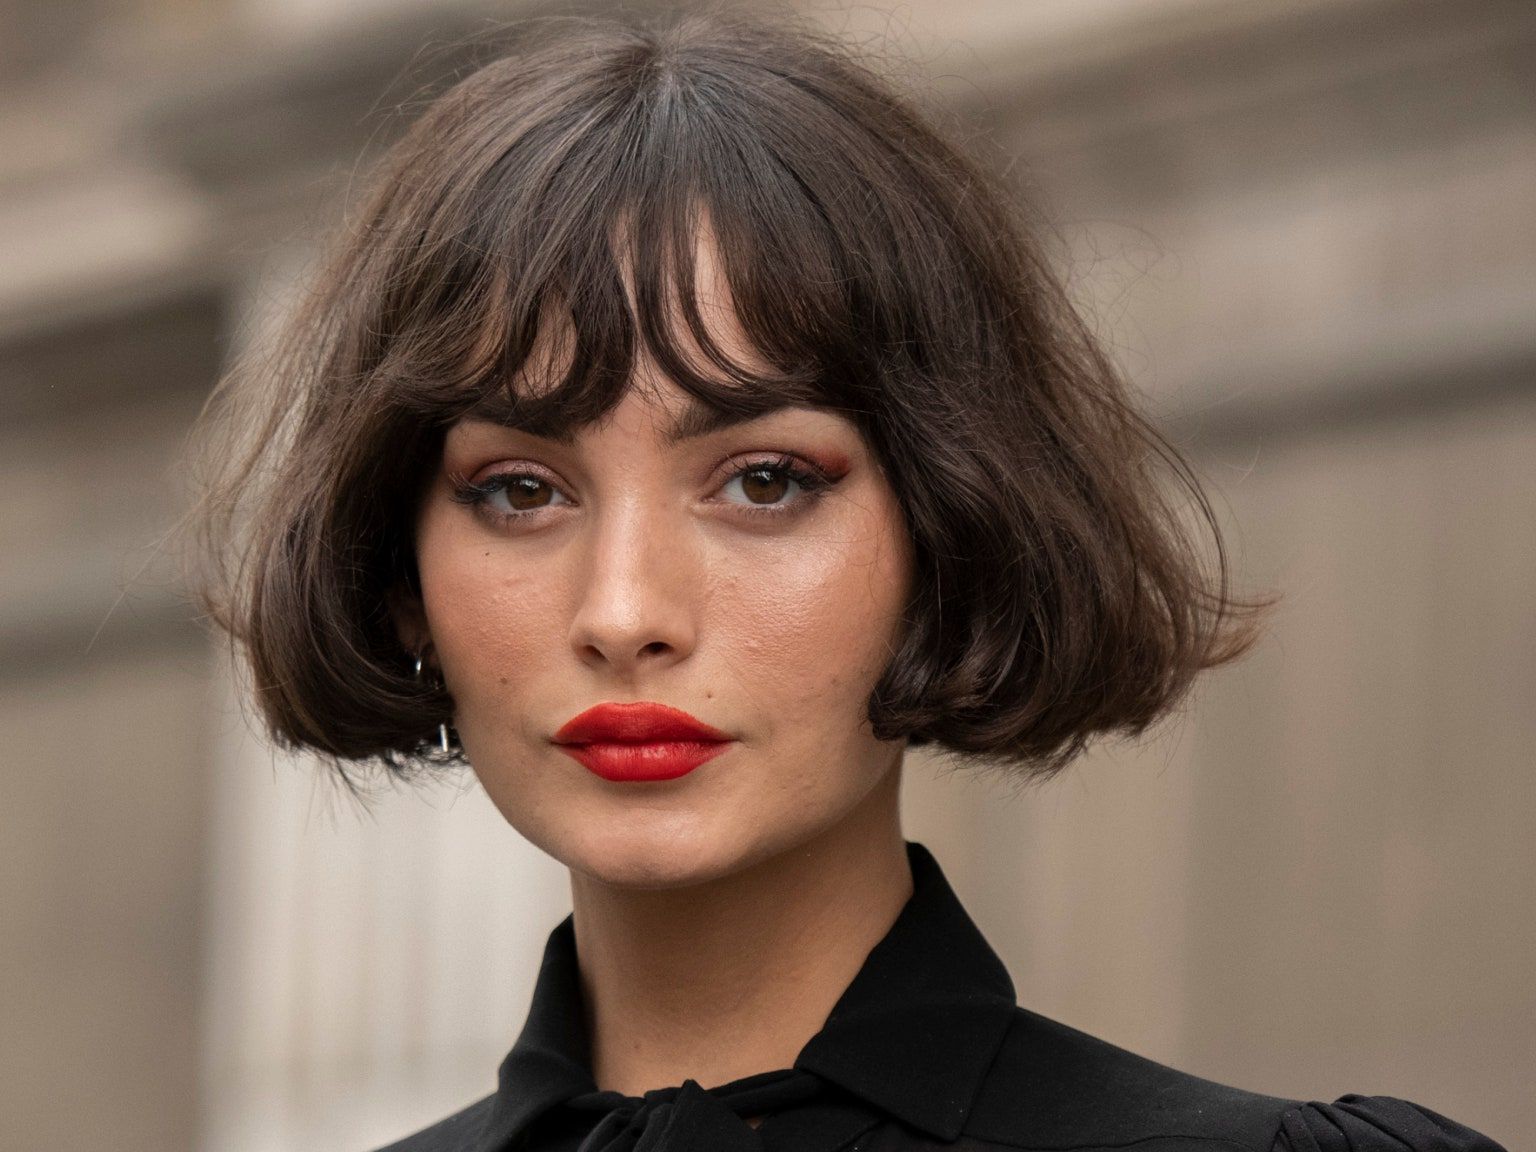 Hairstylist Joseph Maine Explains How To Cut And Style A French Bob Haircut  — See Video | Allure With Regard To The French Bob (View 8 of 25)